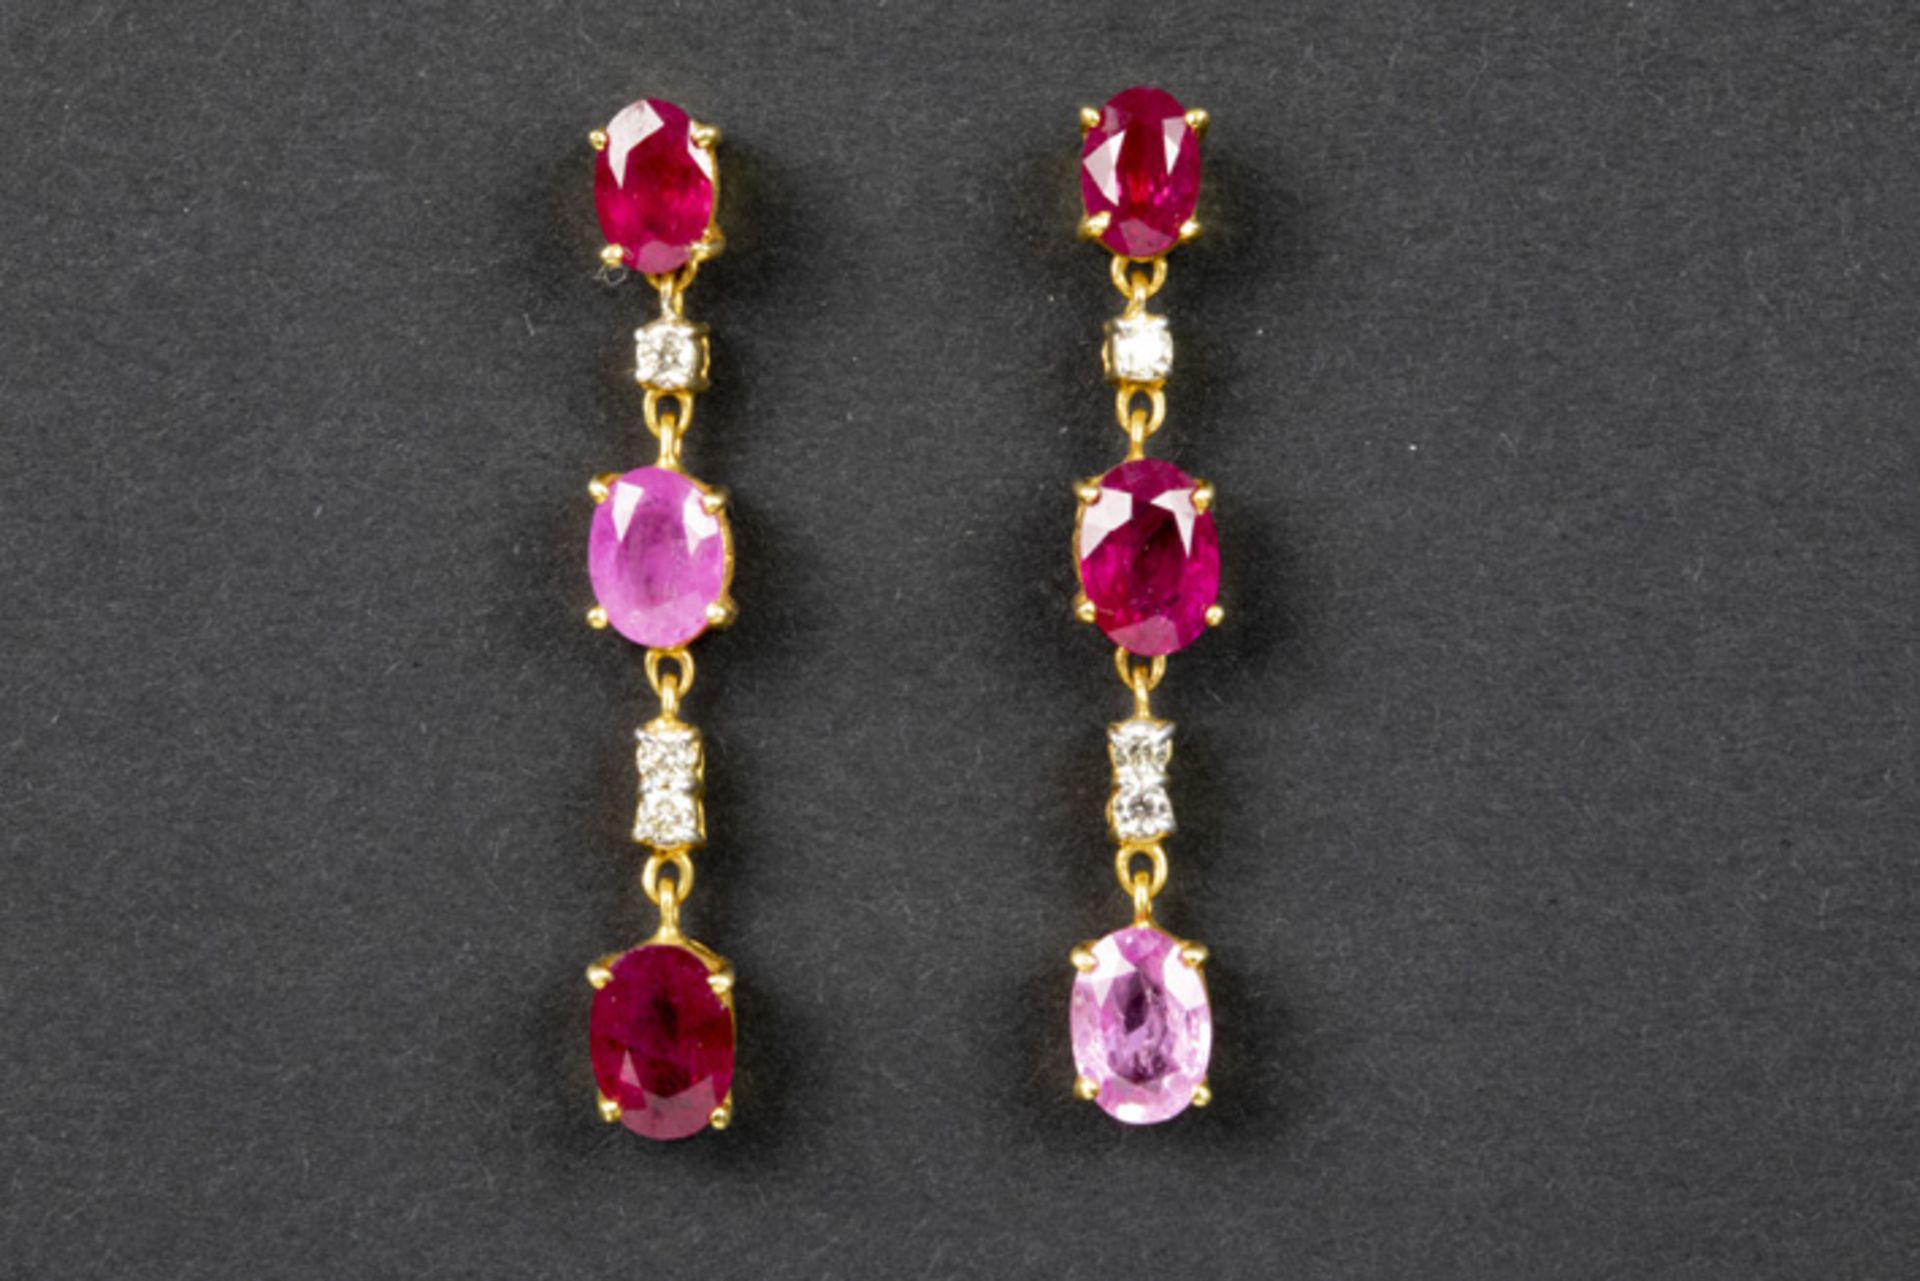 pair of earrings in yellow gold (18 carat) with ca 5 carat of pink sapphires, rubies and high